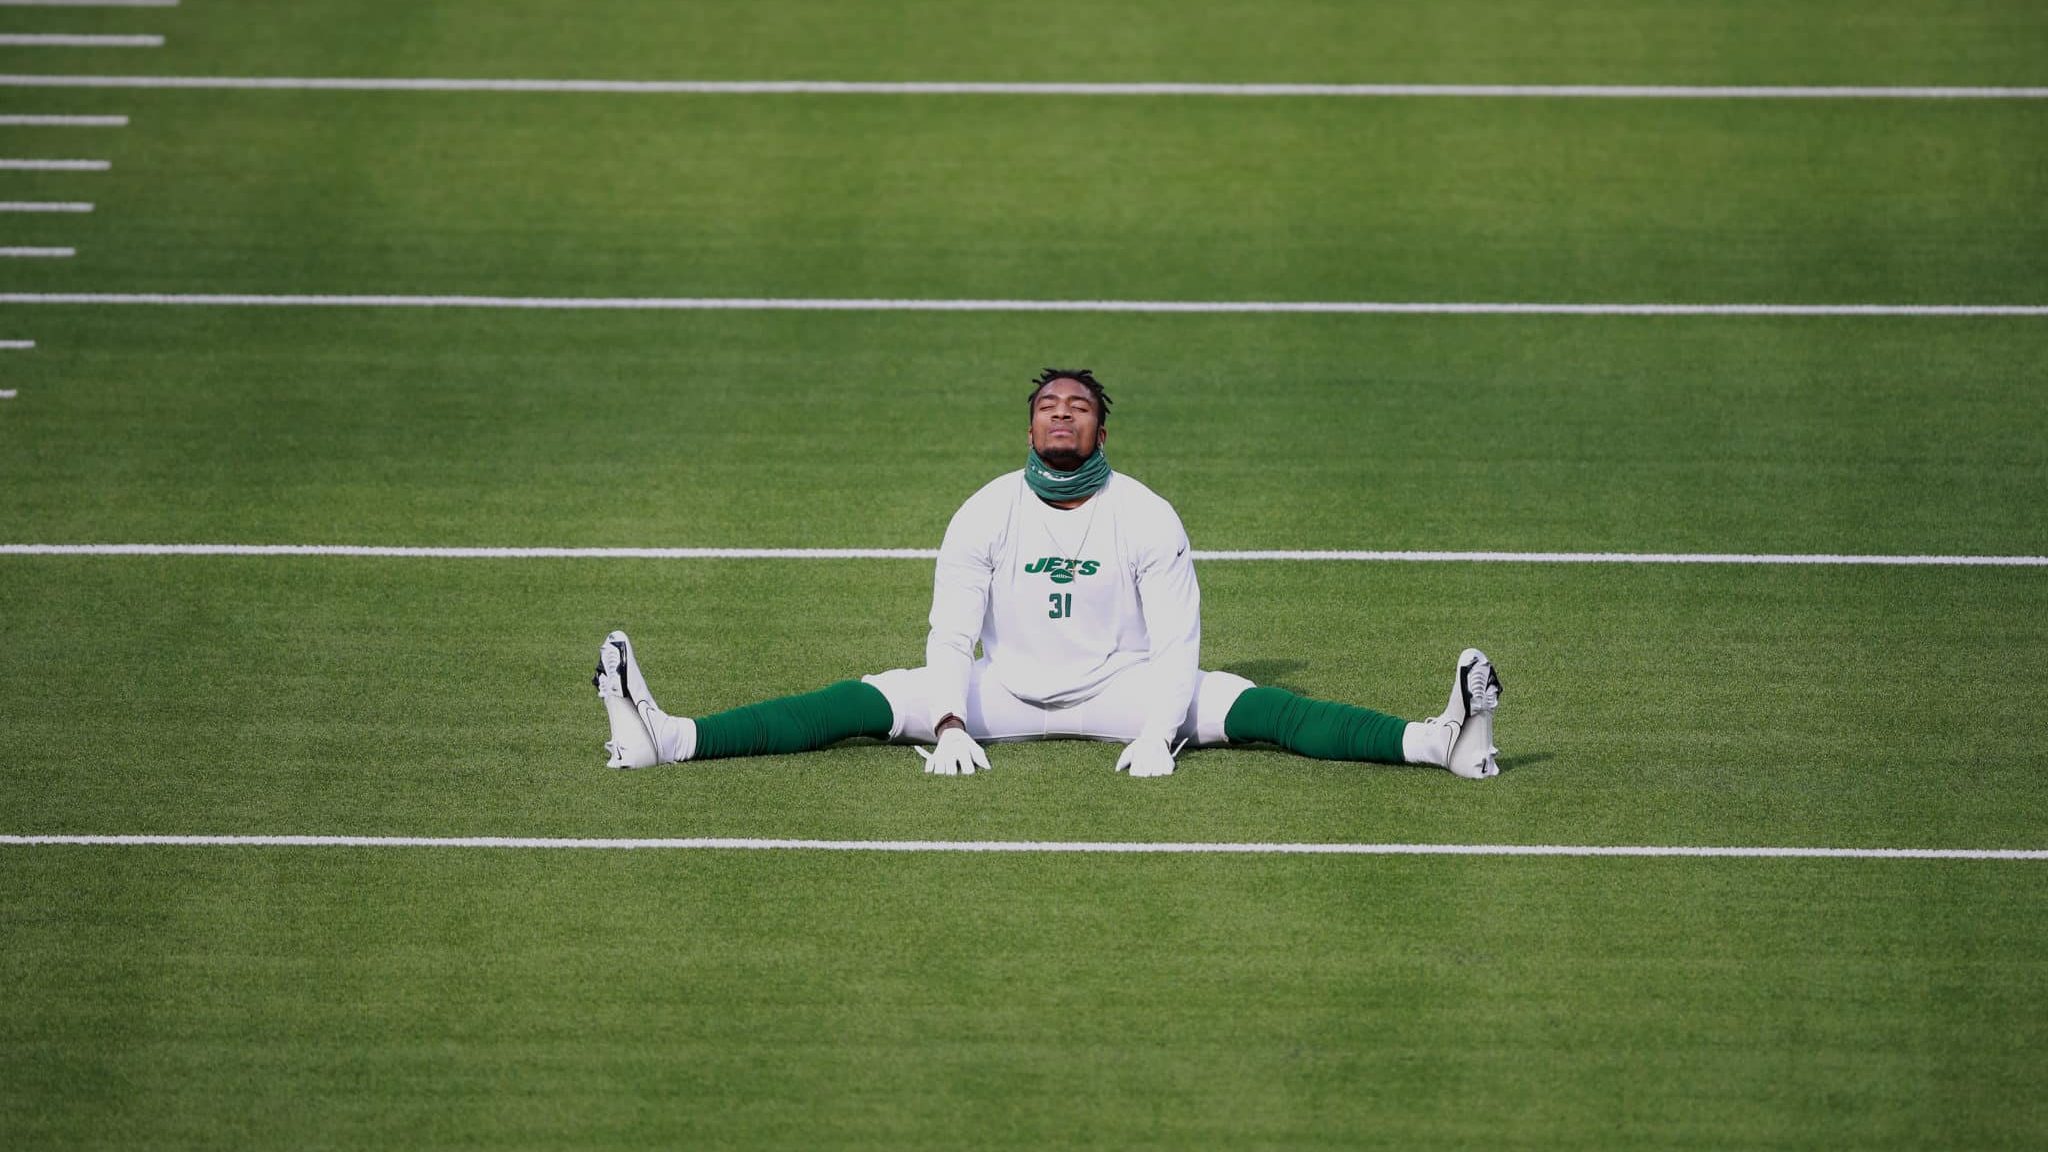 INGLEWOOD, CALIFORNIA - DECEMBER 20: Blessuan Austin #31 of the New York Jets warms up prior to facing the Los Angeles Rams at SoFi Stadium on December 20, 2020 in Inglewood, California.